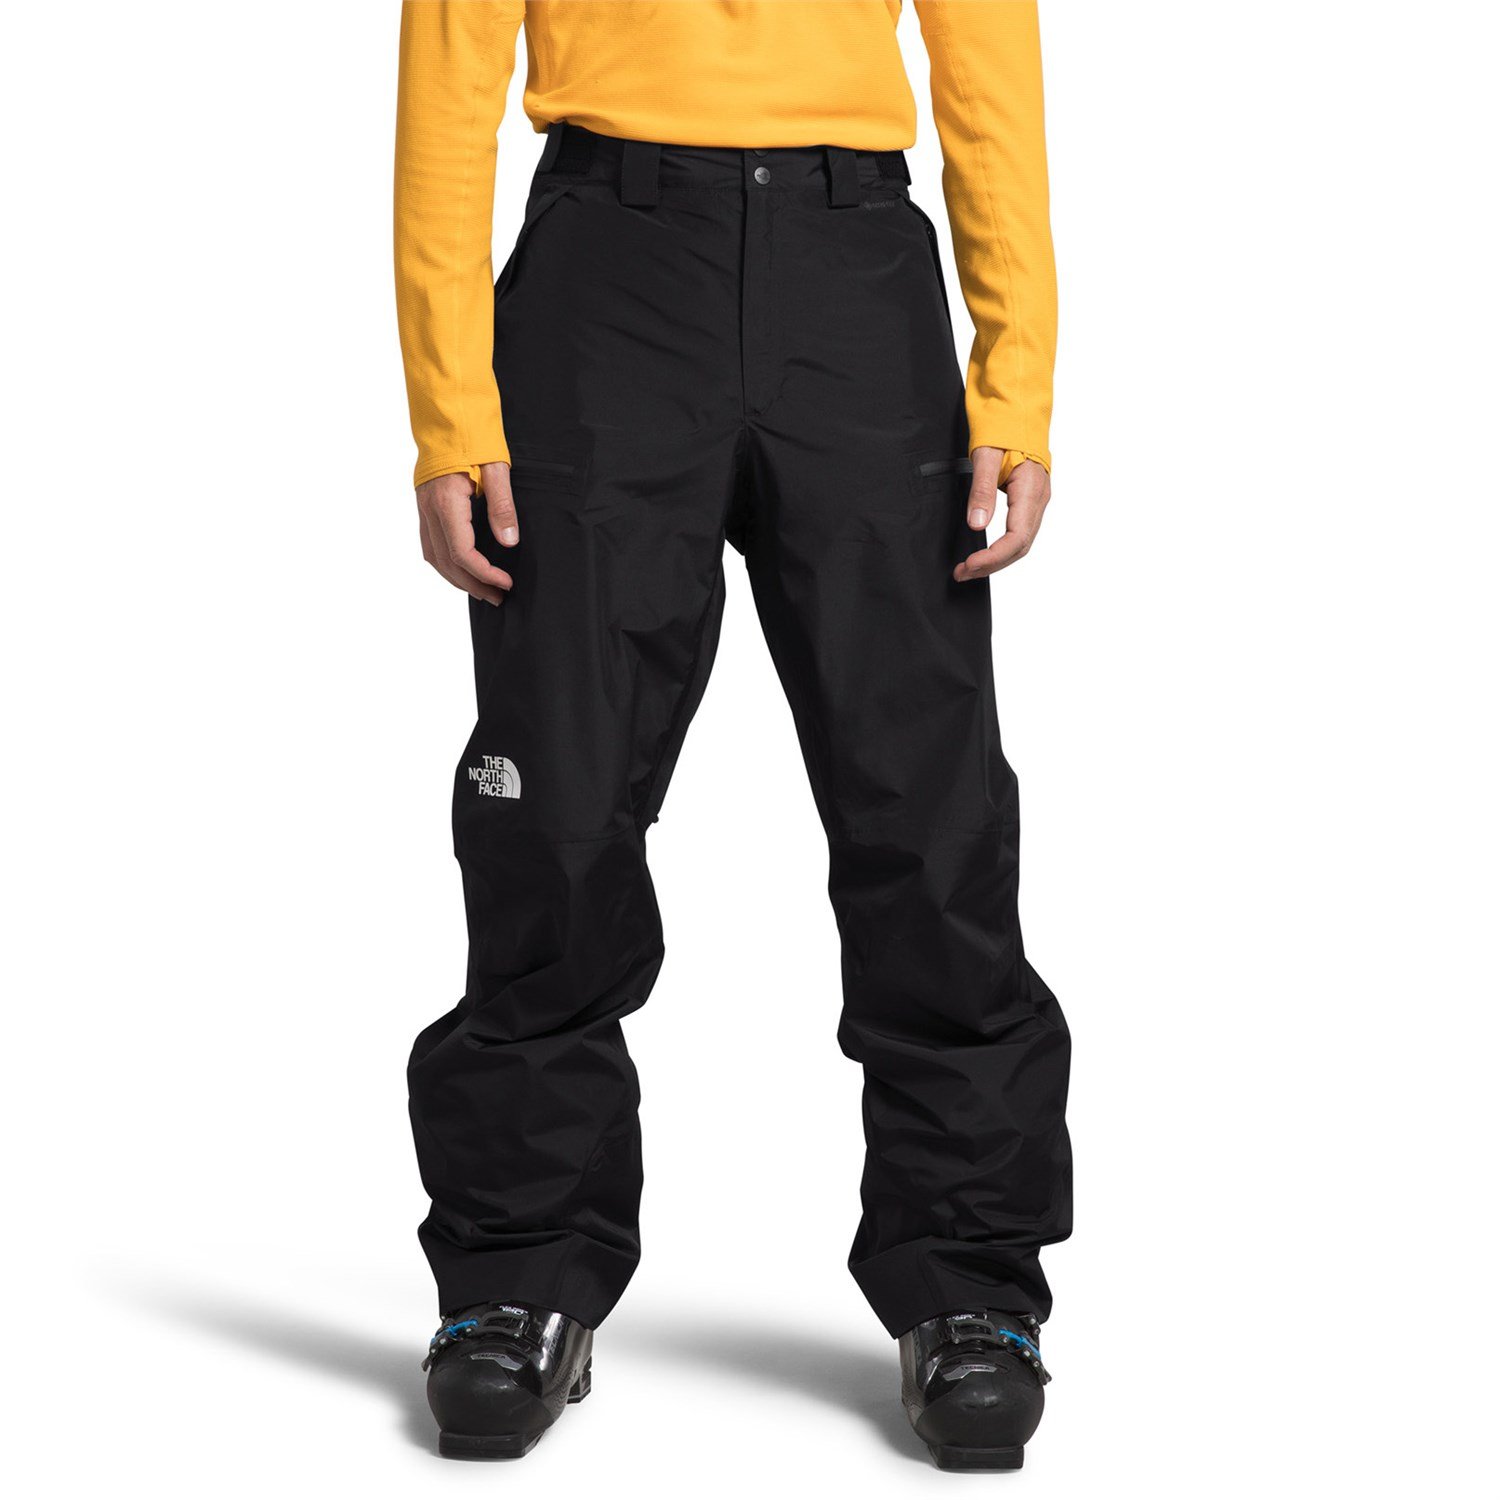 THE NORTH FACE: PANTS AND SHORTS, THE NORTH FACE WIND TRACK PANTS